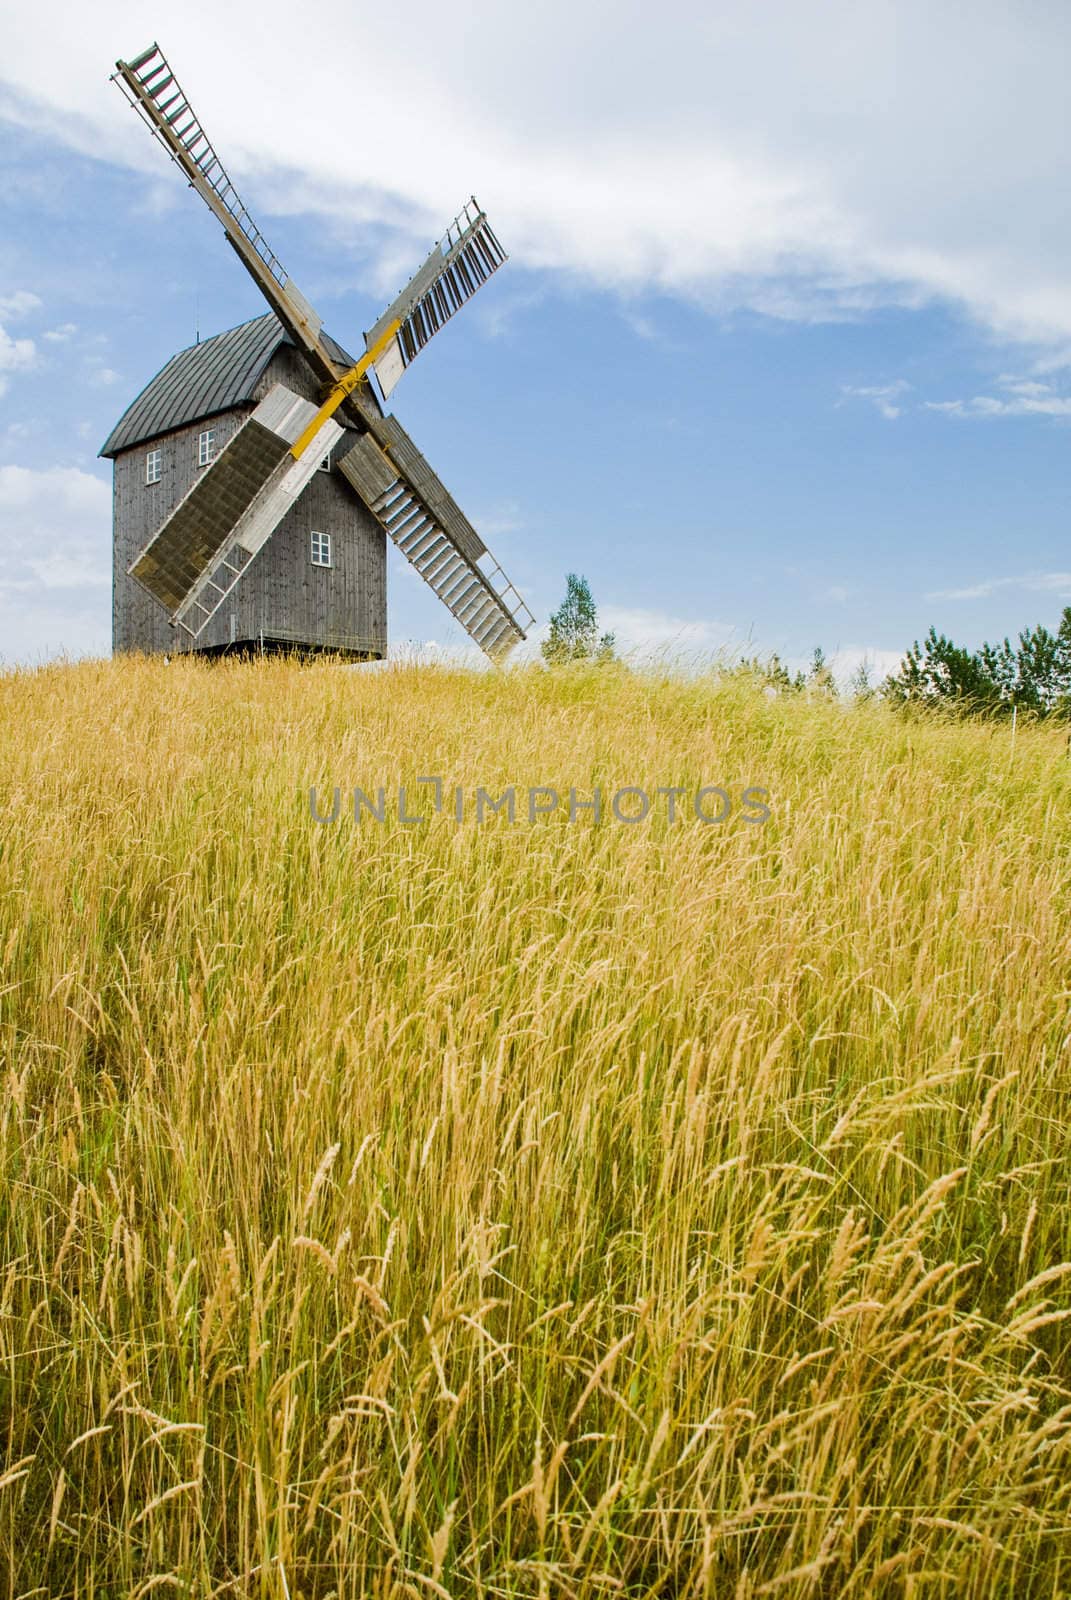 The old windmill costs in the field of mature grain